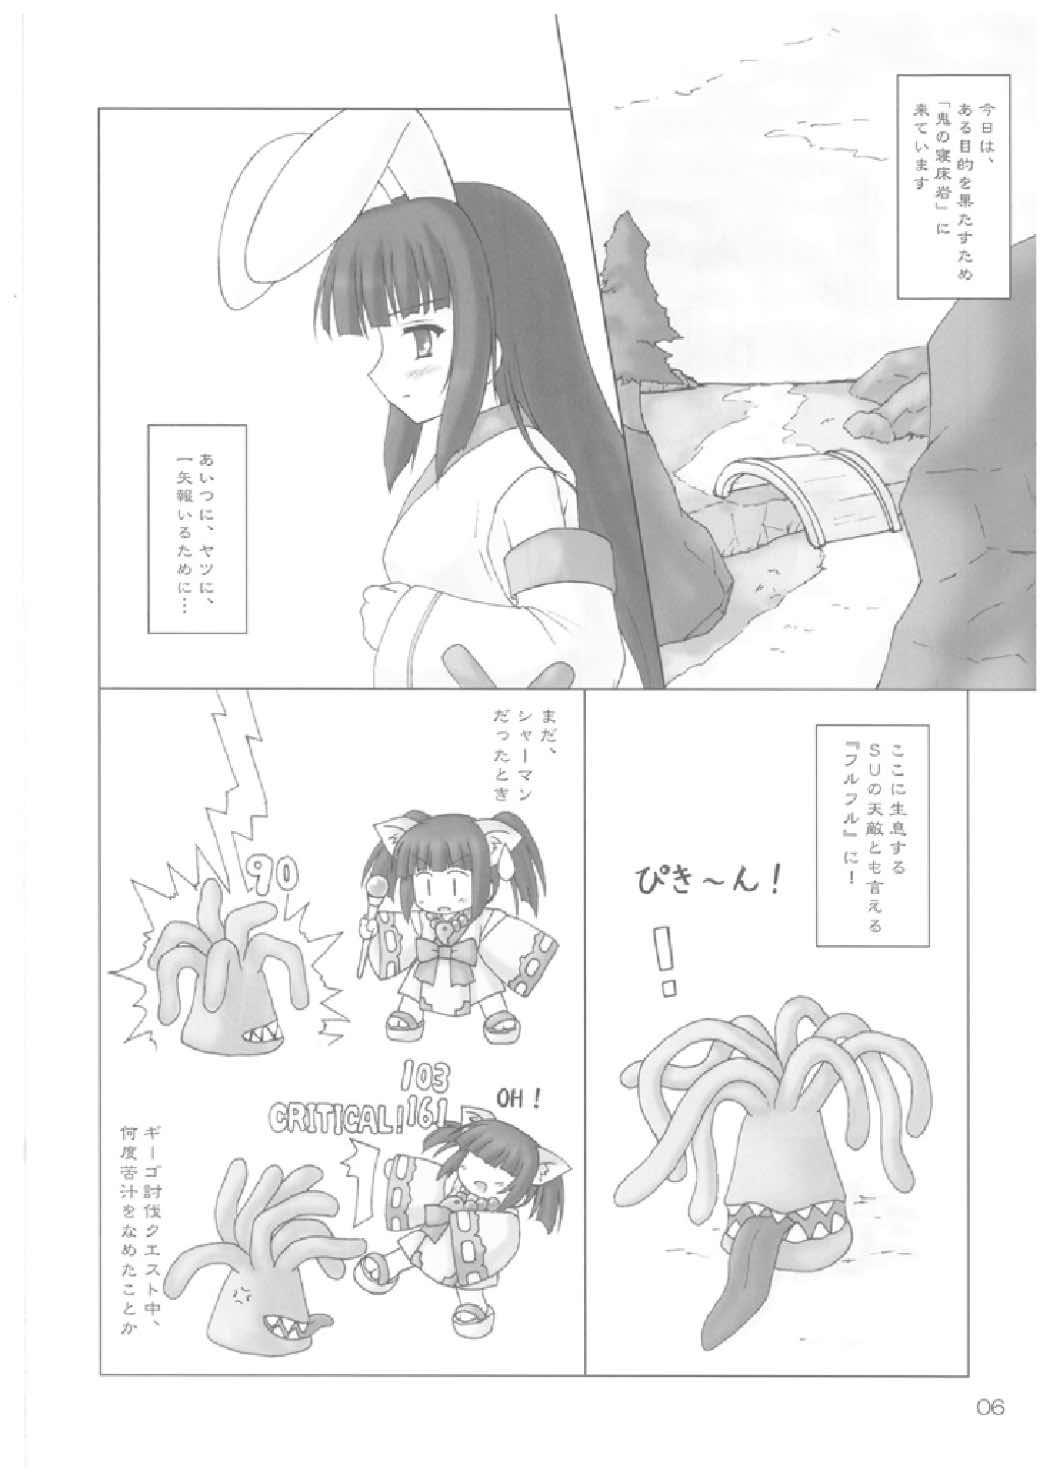 Ass Licking Elementaler Confusion Obscenity - Emil chronicle online Por - Page 6